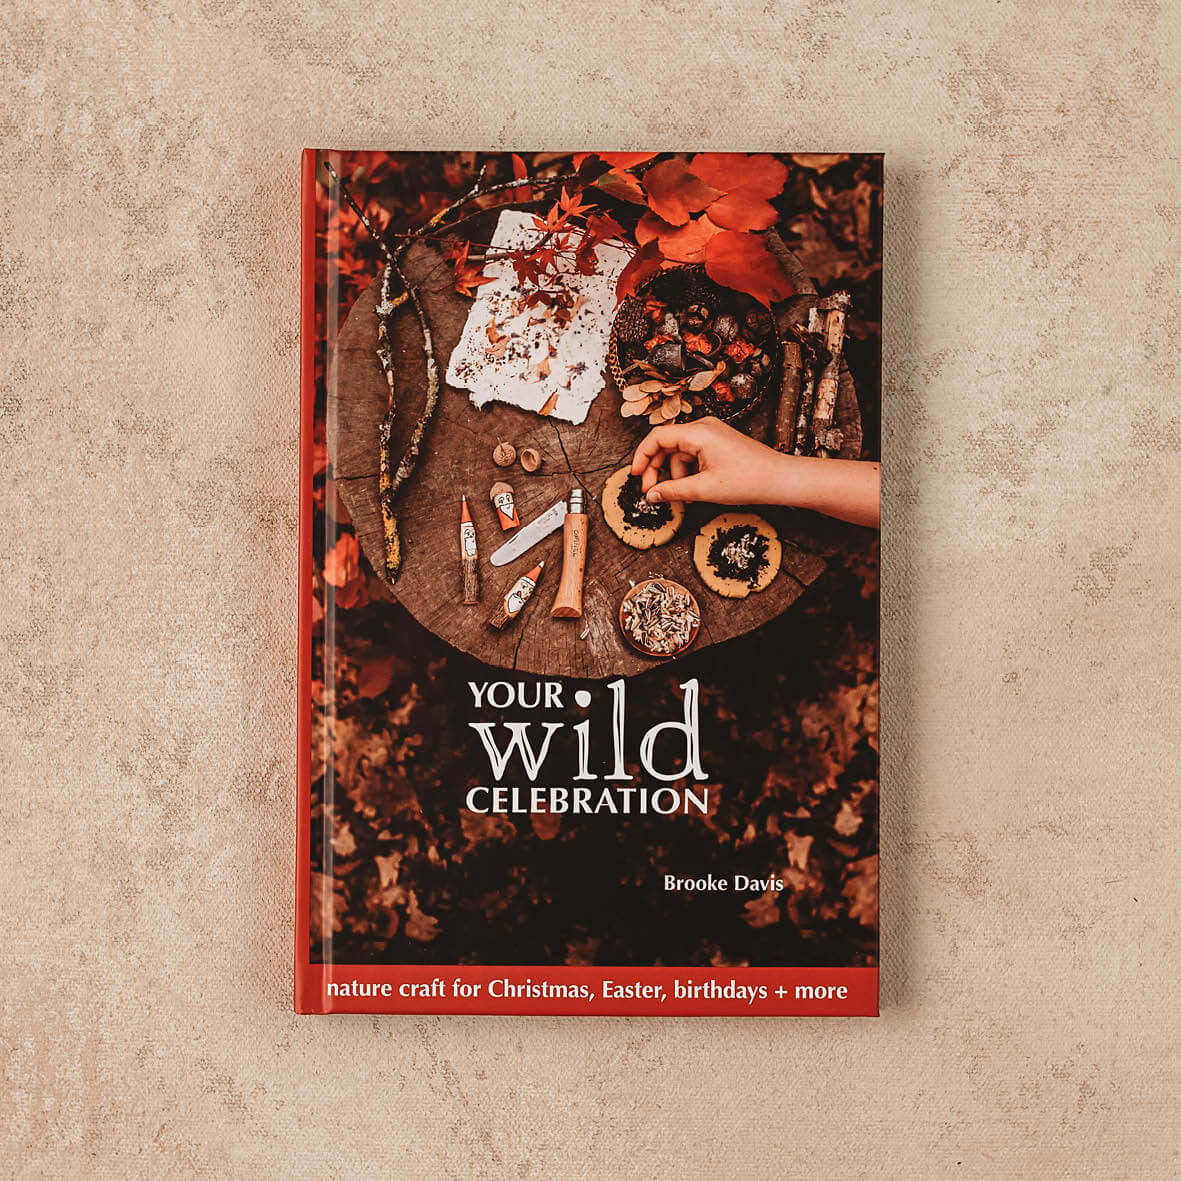 Your Wild Celebration book, nature craft for Christmas, Easter, birthdays and more. Made in Australia by Your Wild Books.